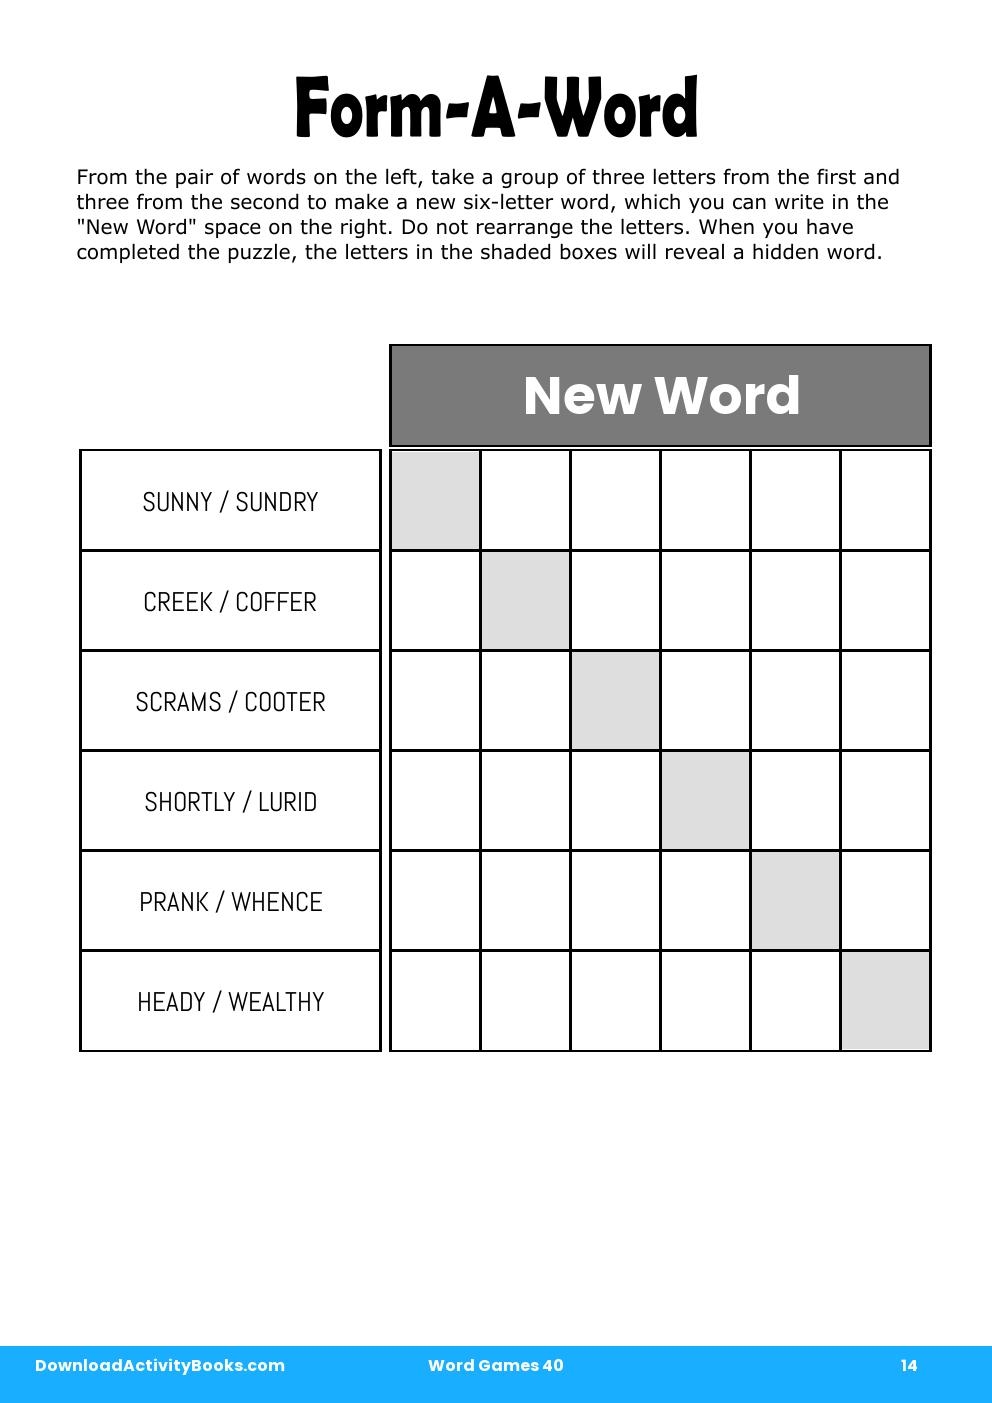 Form-A-Word in Word Games 40